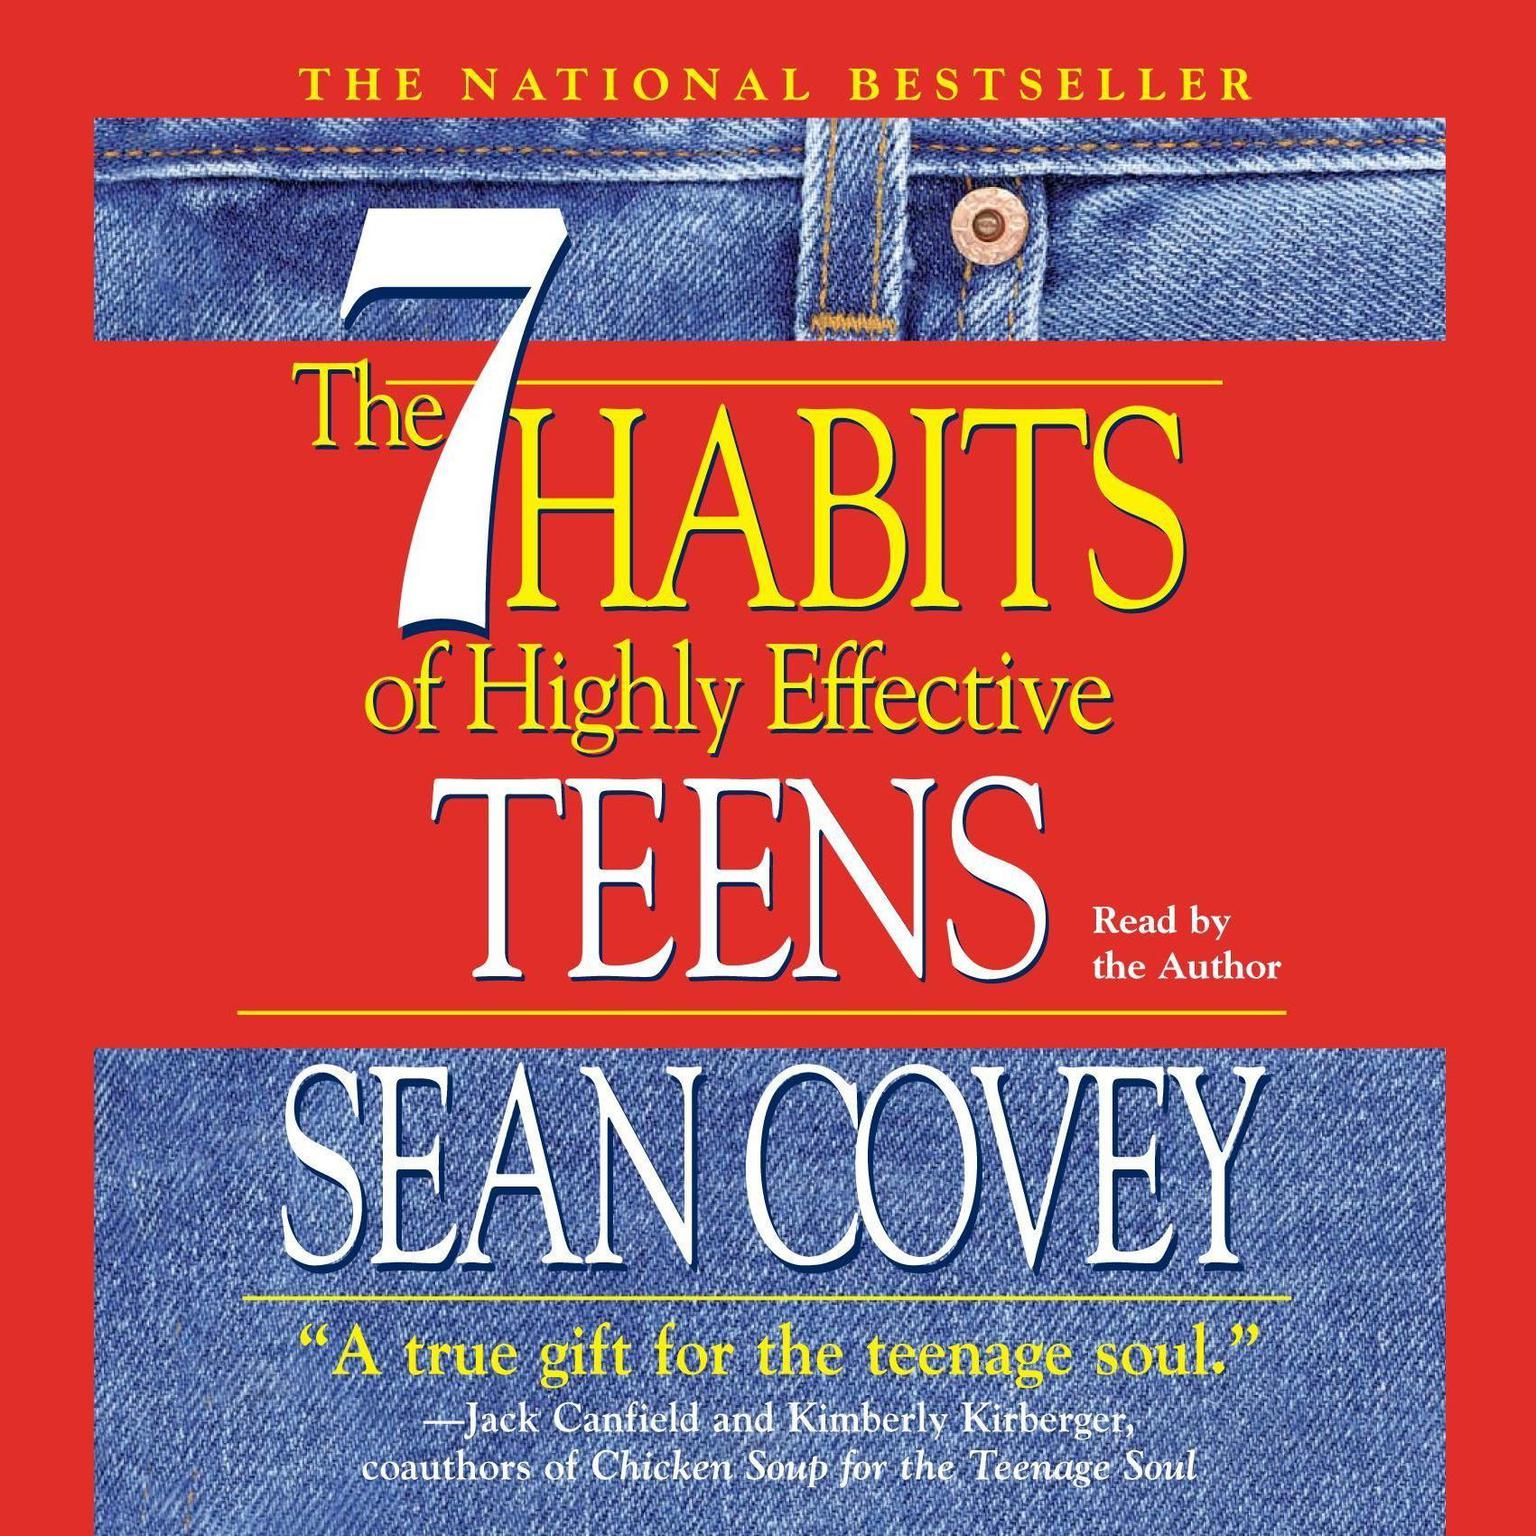 The 7 Habits Of Highly Effective Teens (Abridged) Audiobook, by Sean Covey